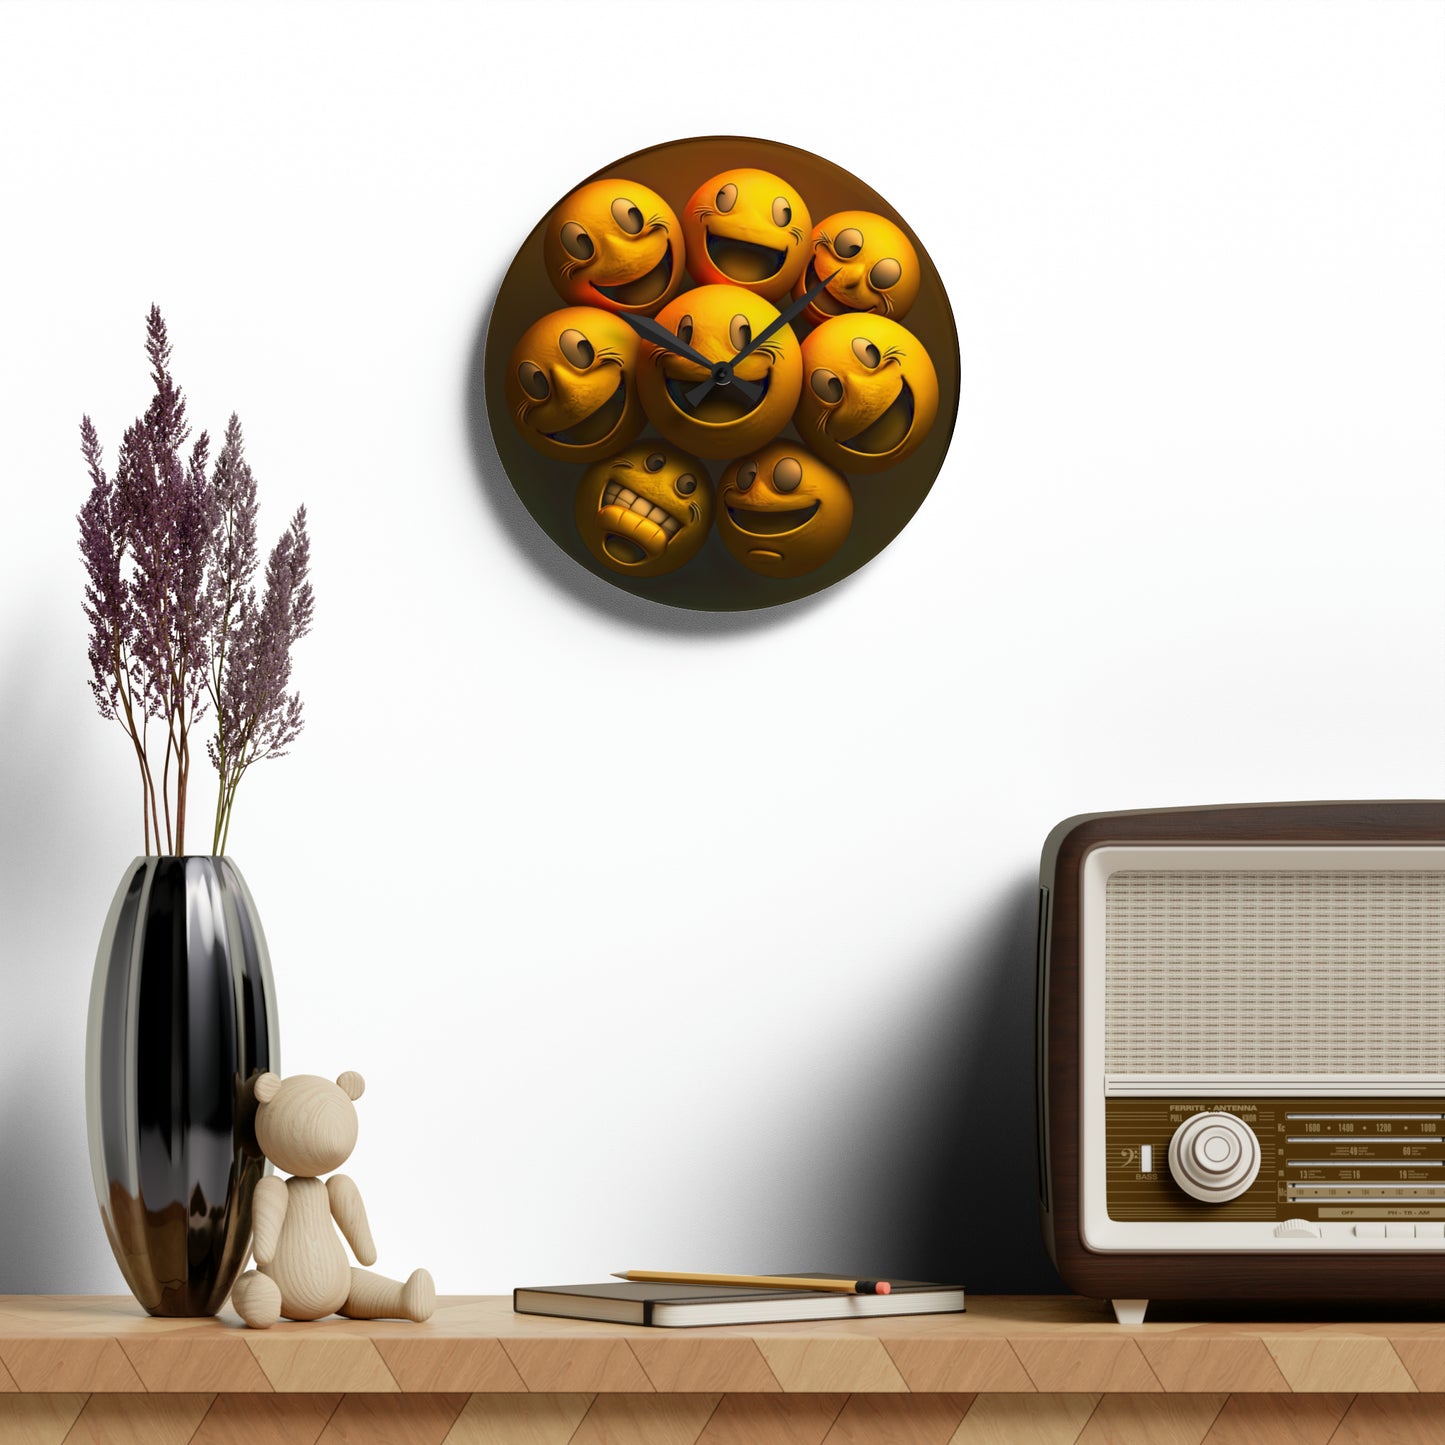 Happiest Of Faces Smiling, Style 1 Wall Clock